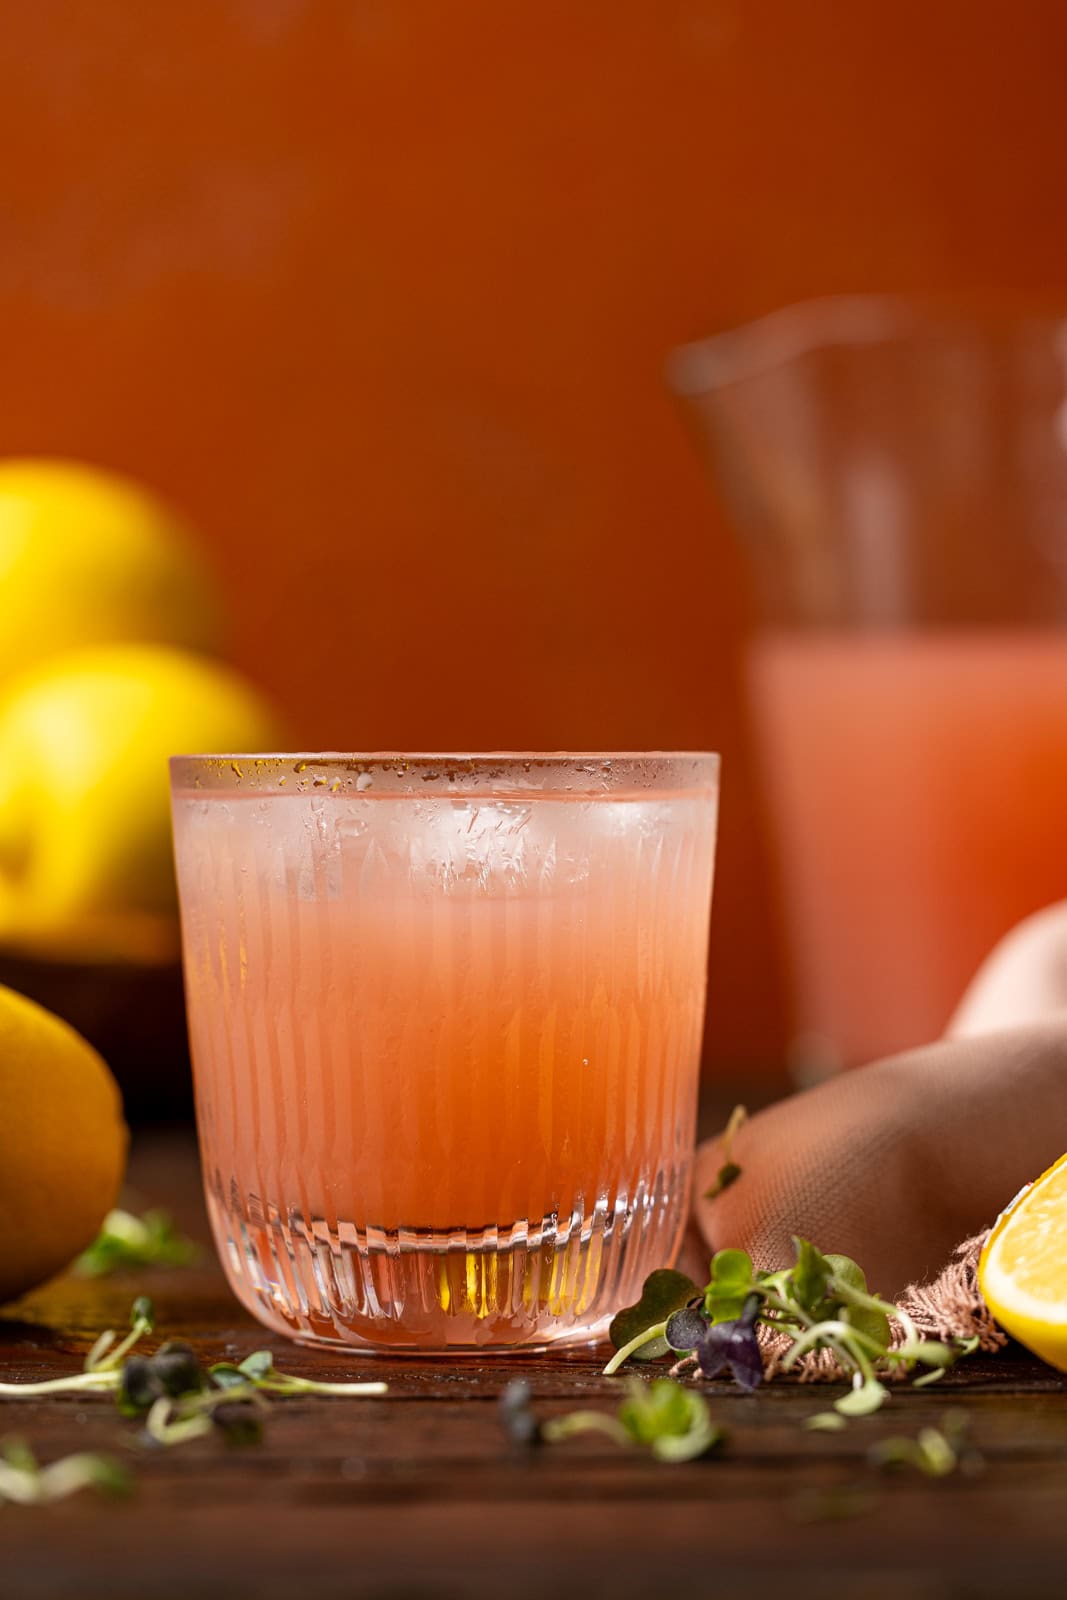 Glass and pitcher of pink lemonade with lemons and herb garnish.